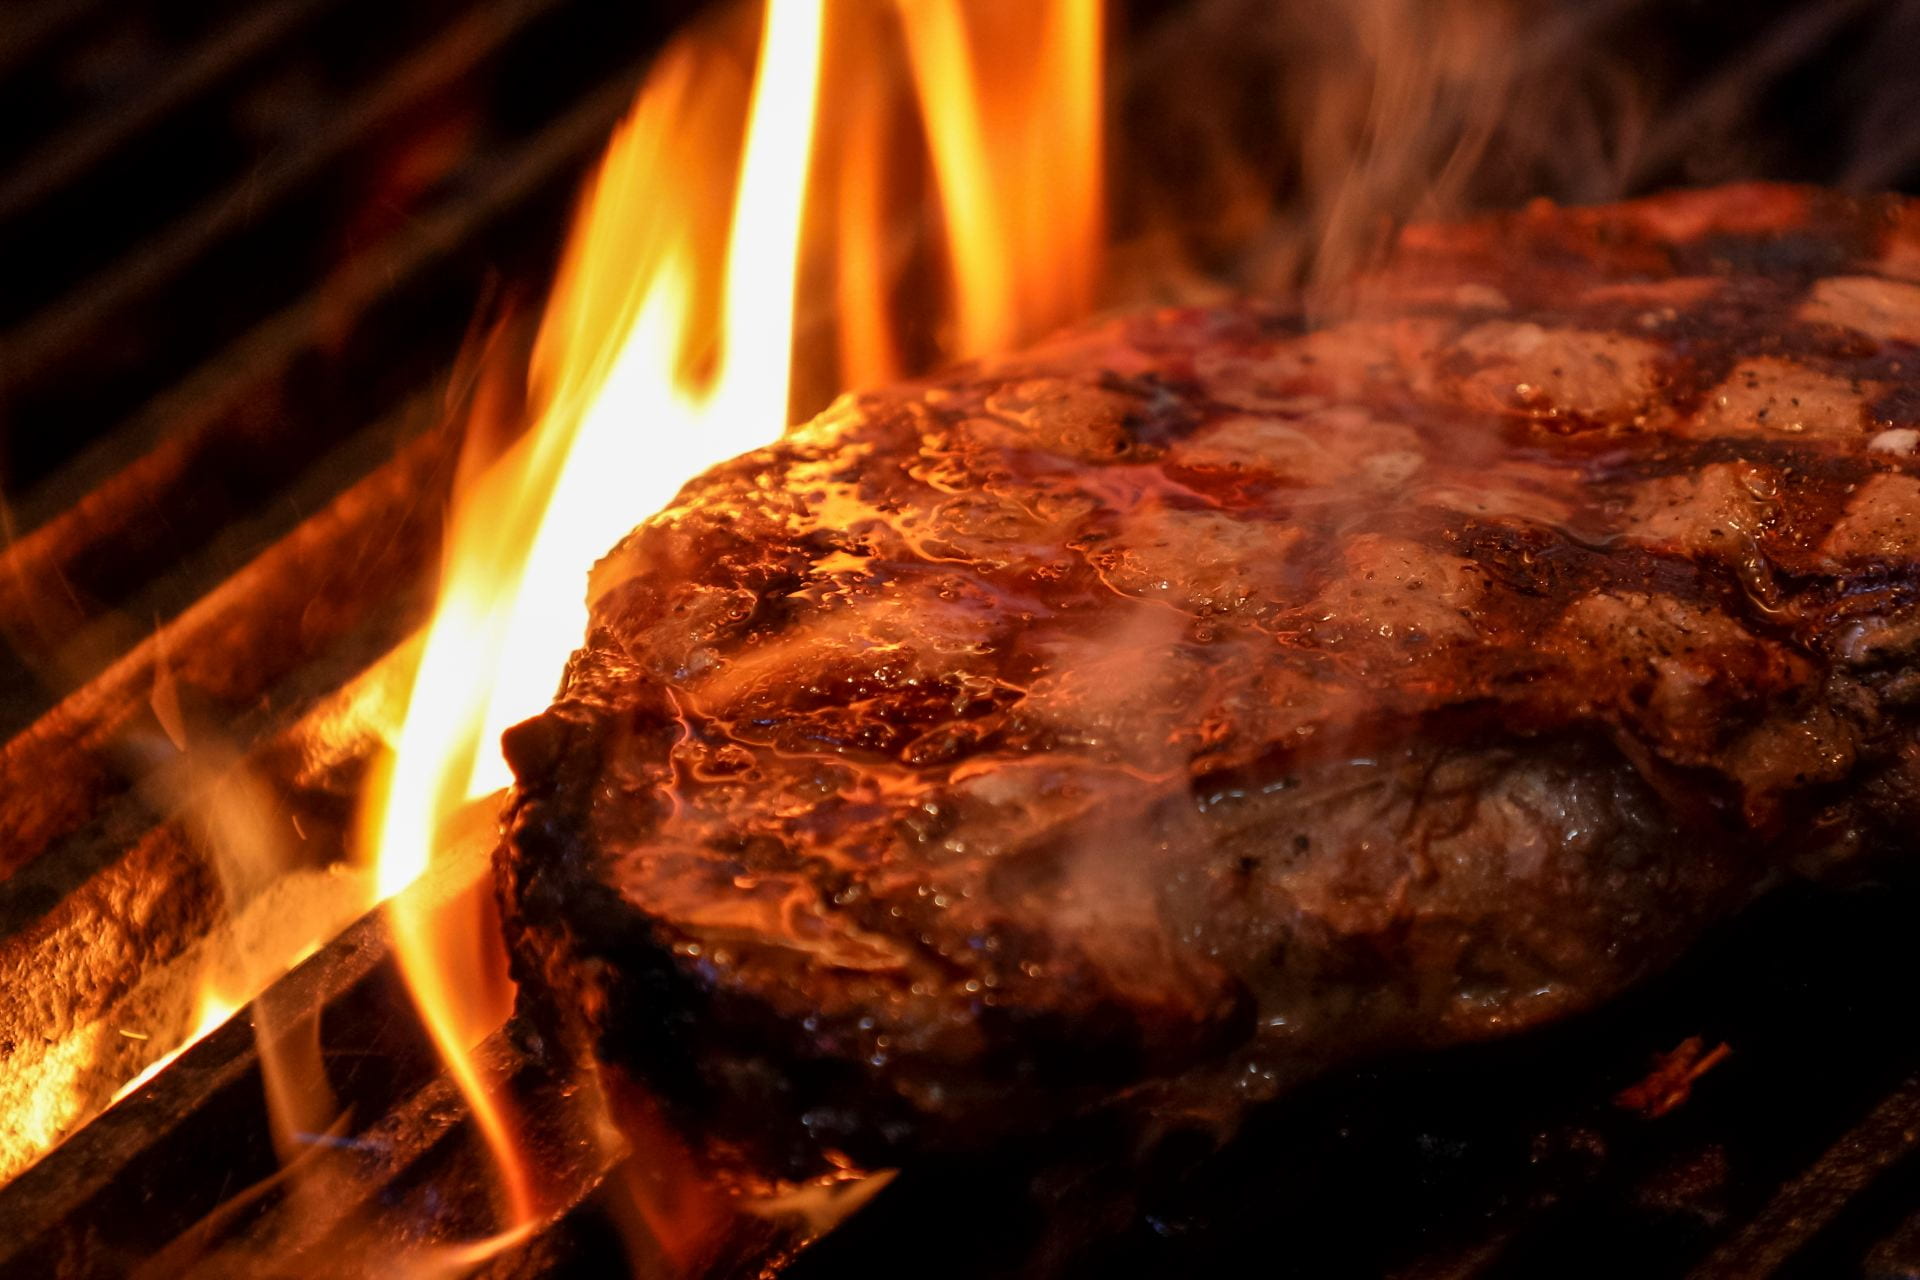 Close up of a steak on a grill with flames beneath.